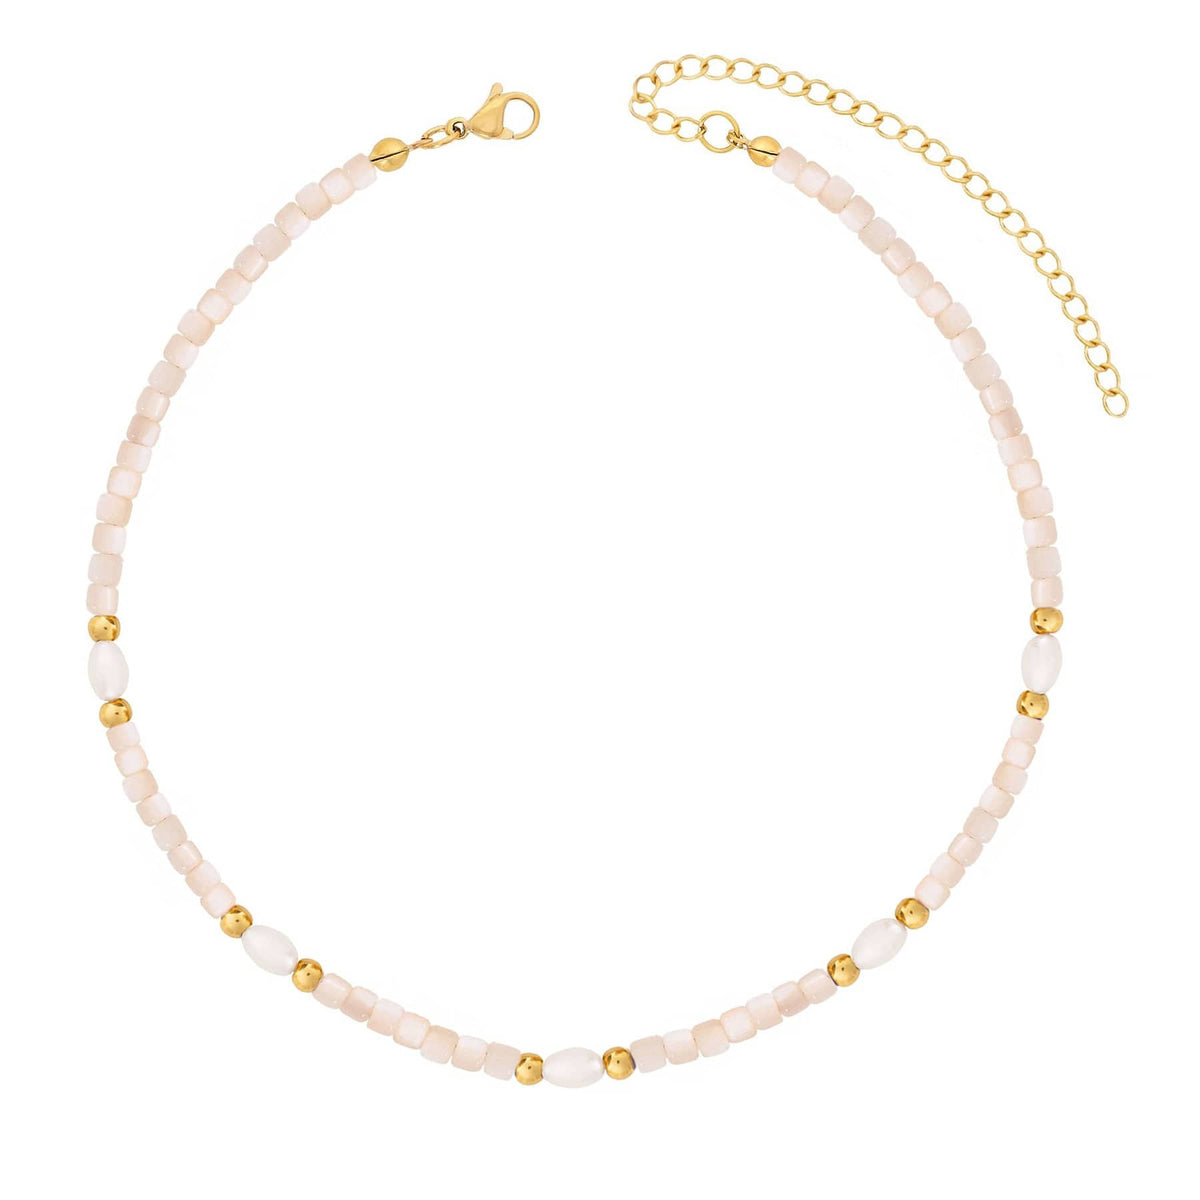 BohoMoon Stainless Steel Neutral Pearl Choker Gold